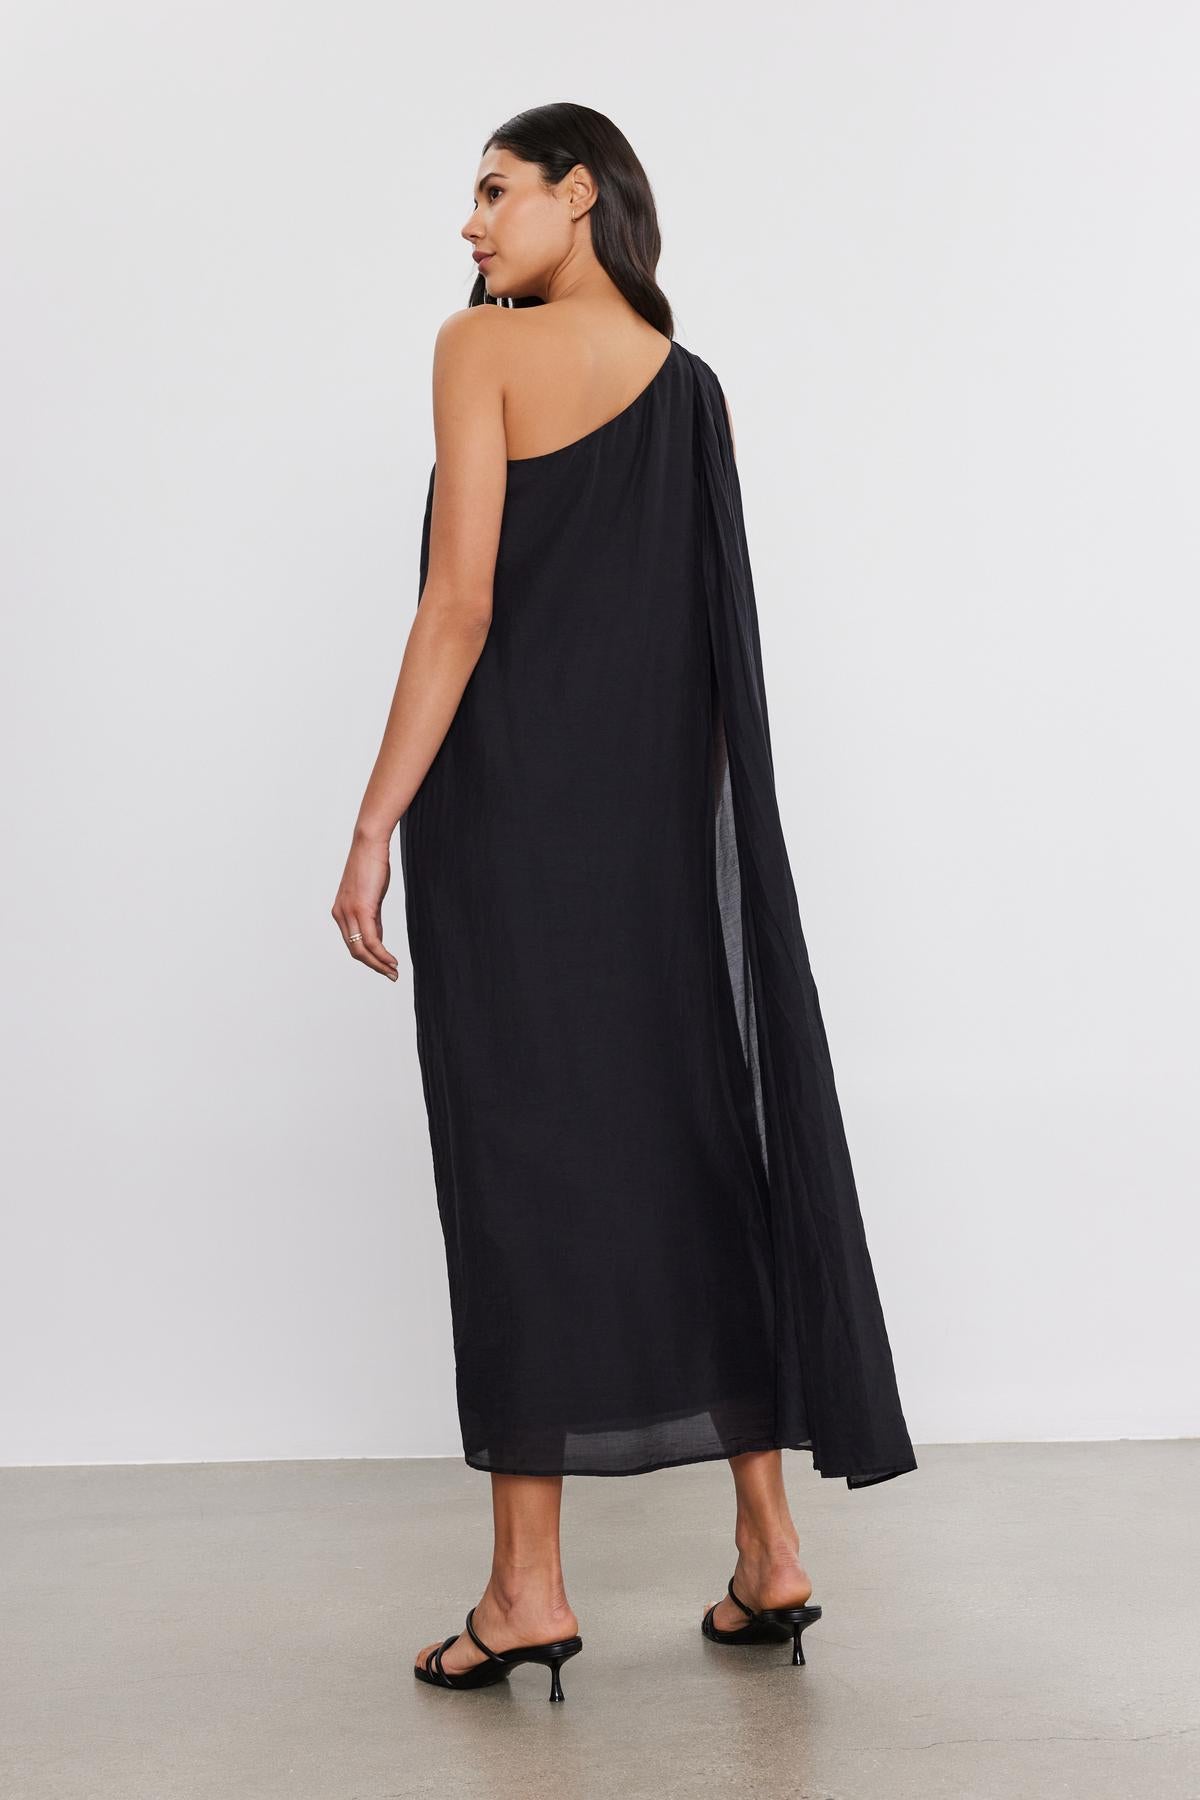 A woman stands with her back to the camera, wearing a flowing black one-shoulder Diana Dress made of silk cotton voile by Velvet by Graham & Spencer and black high heels.-36918818963649